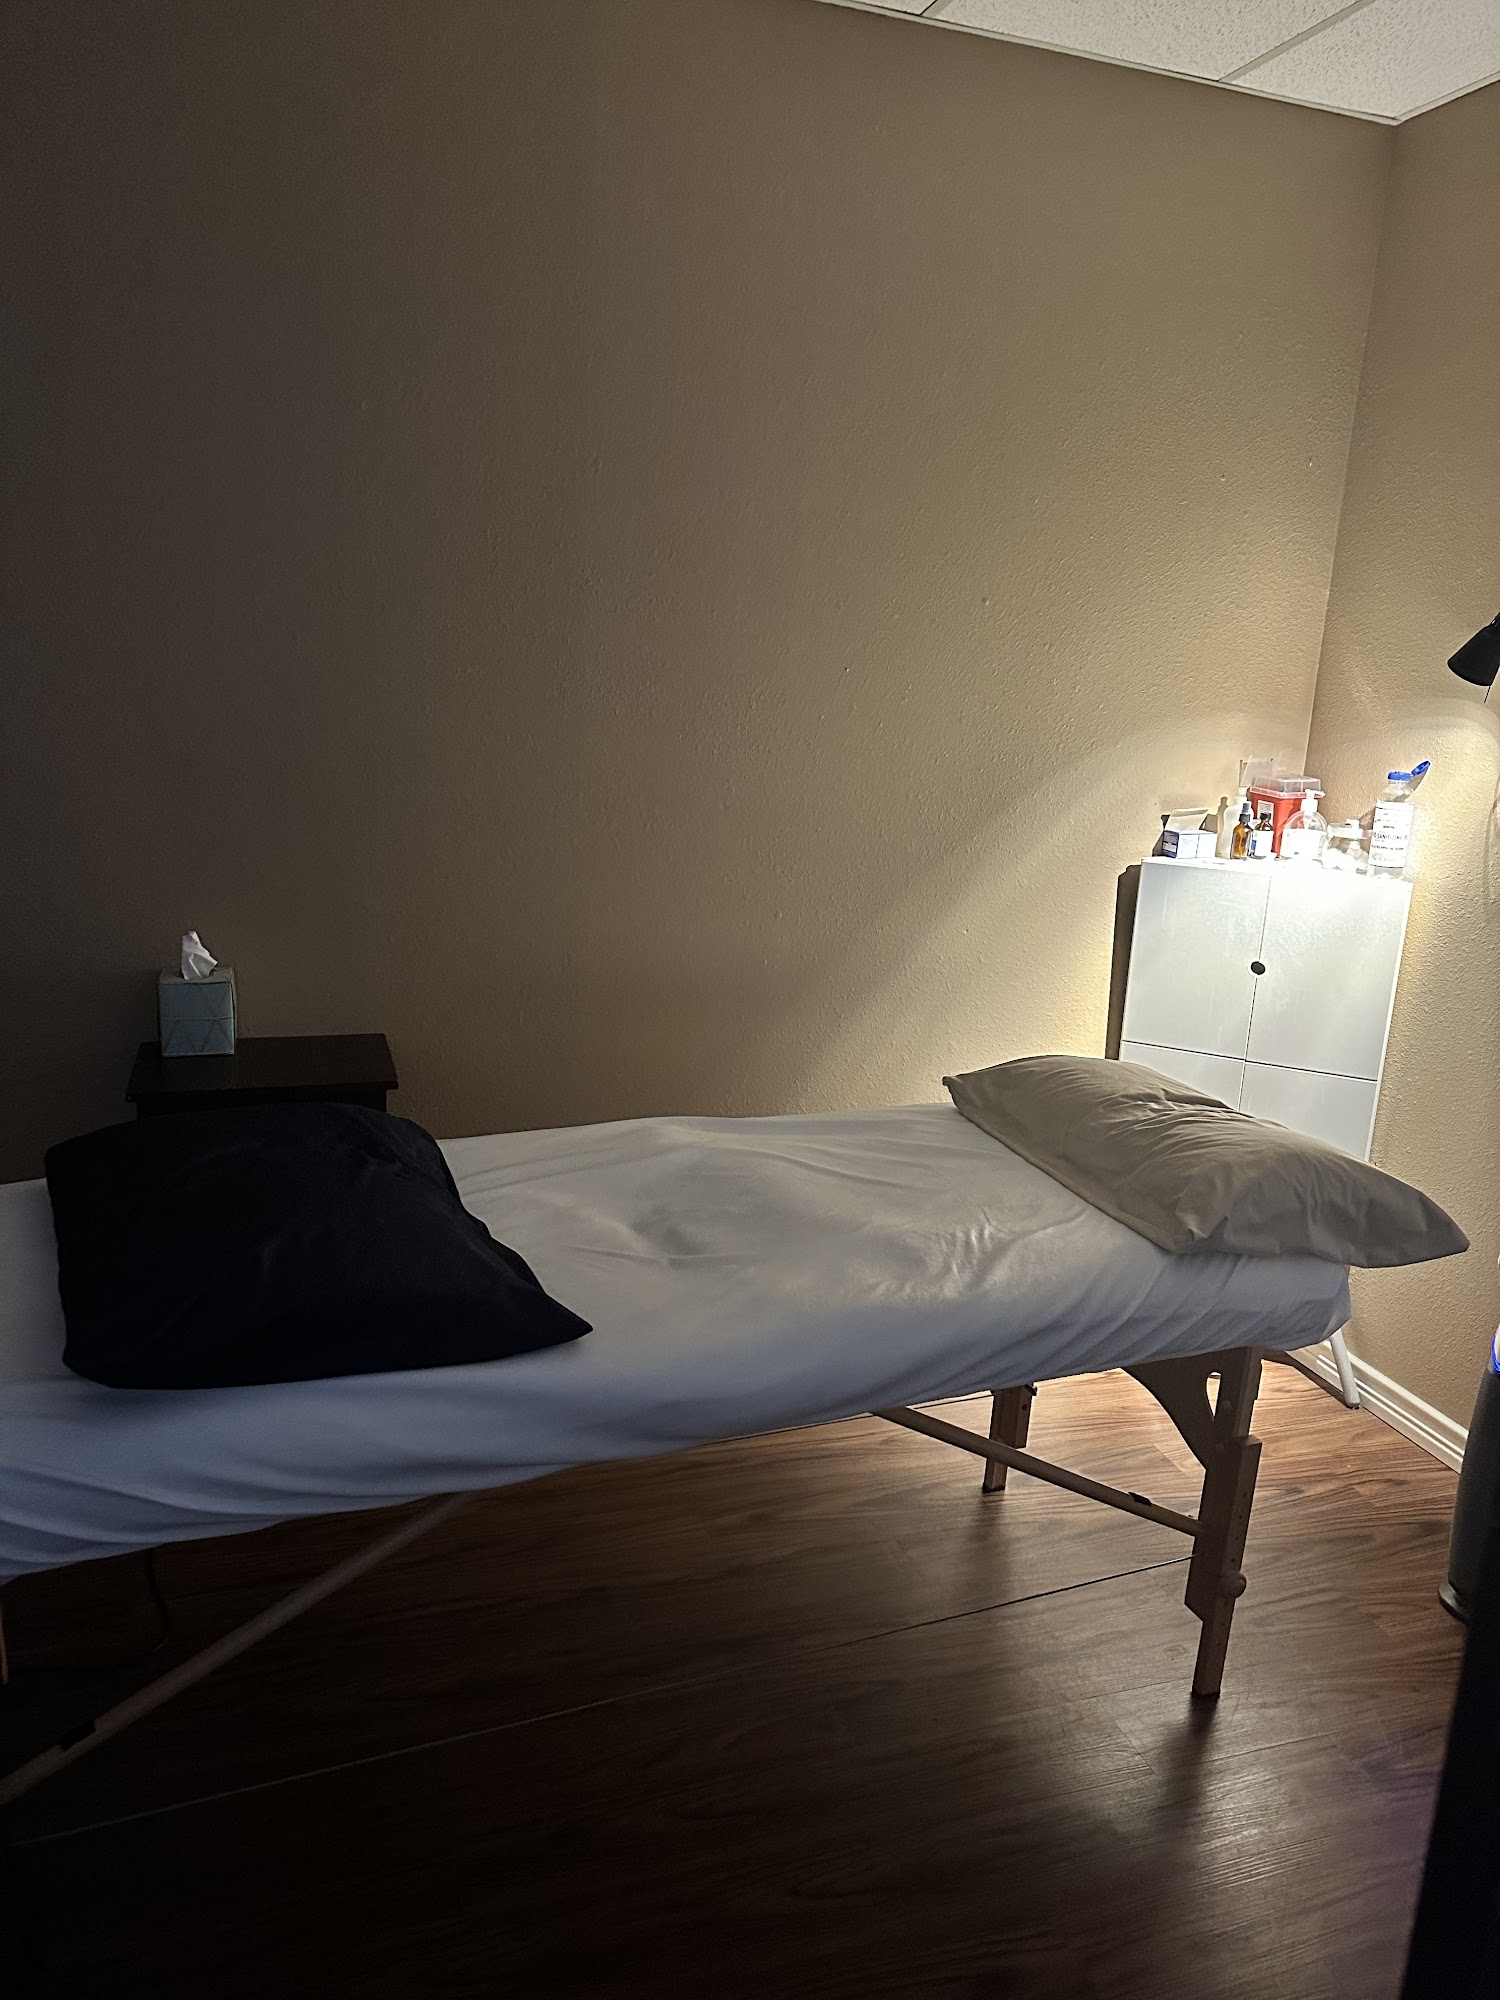 San Marcos Community Acupuncture Clinic